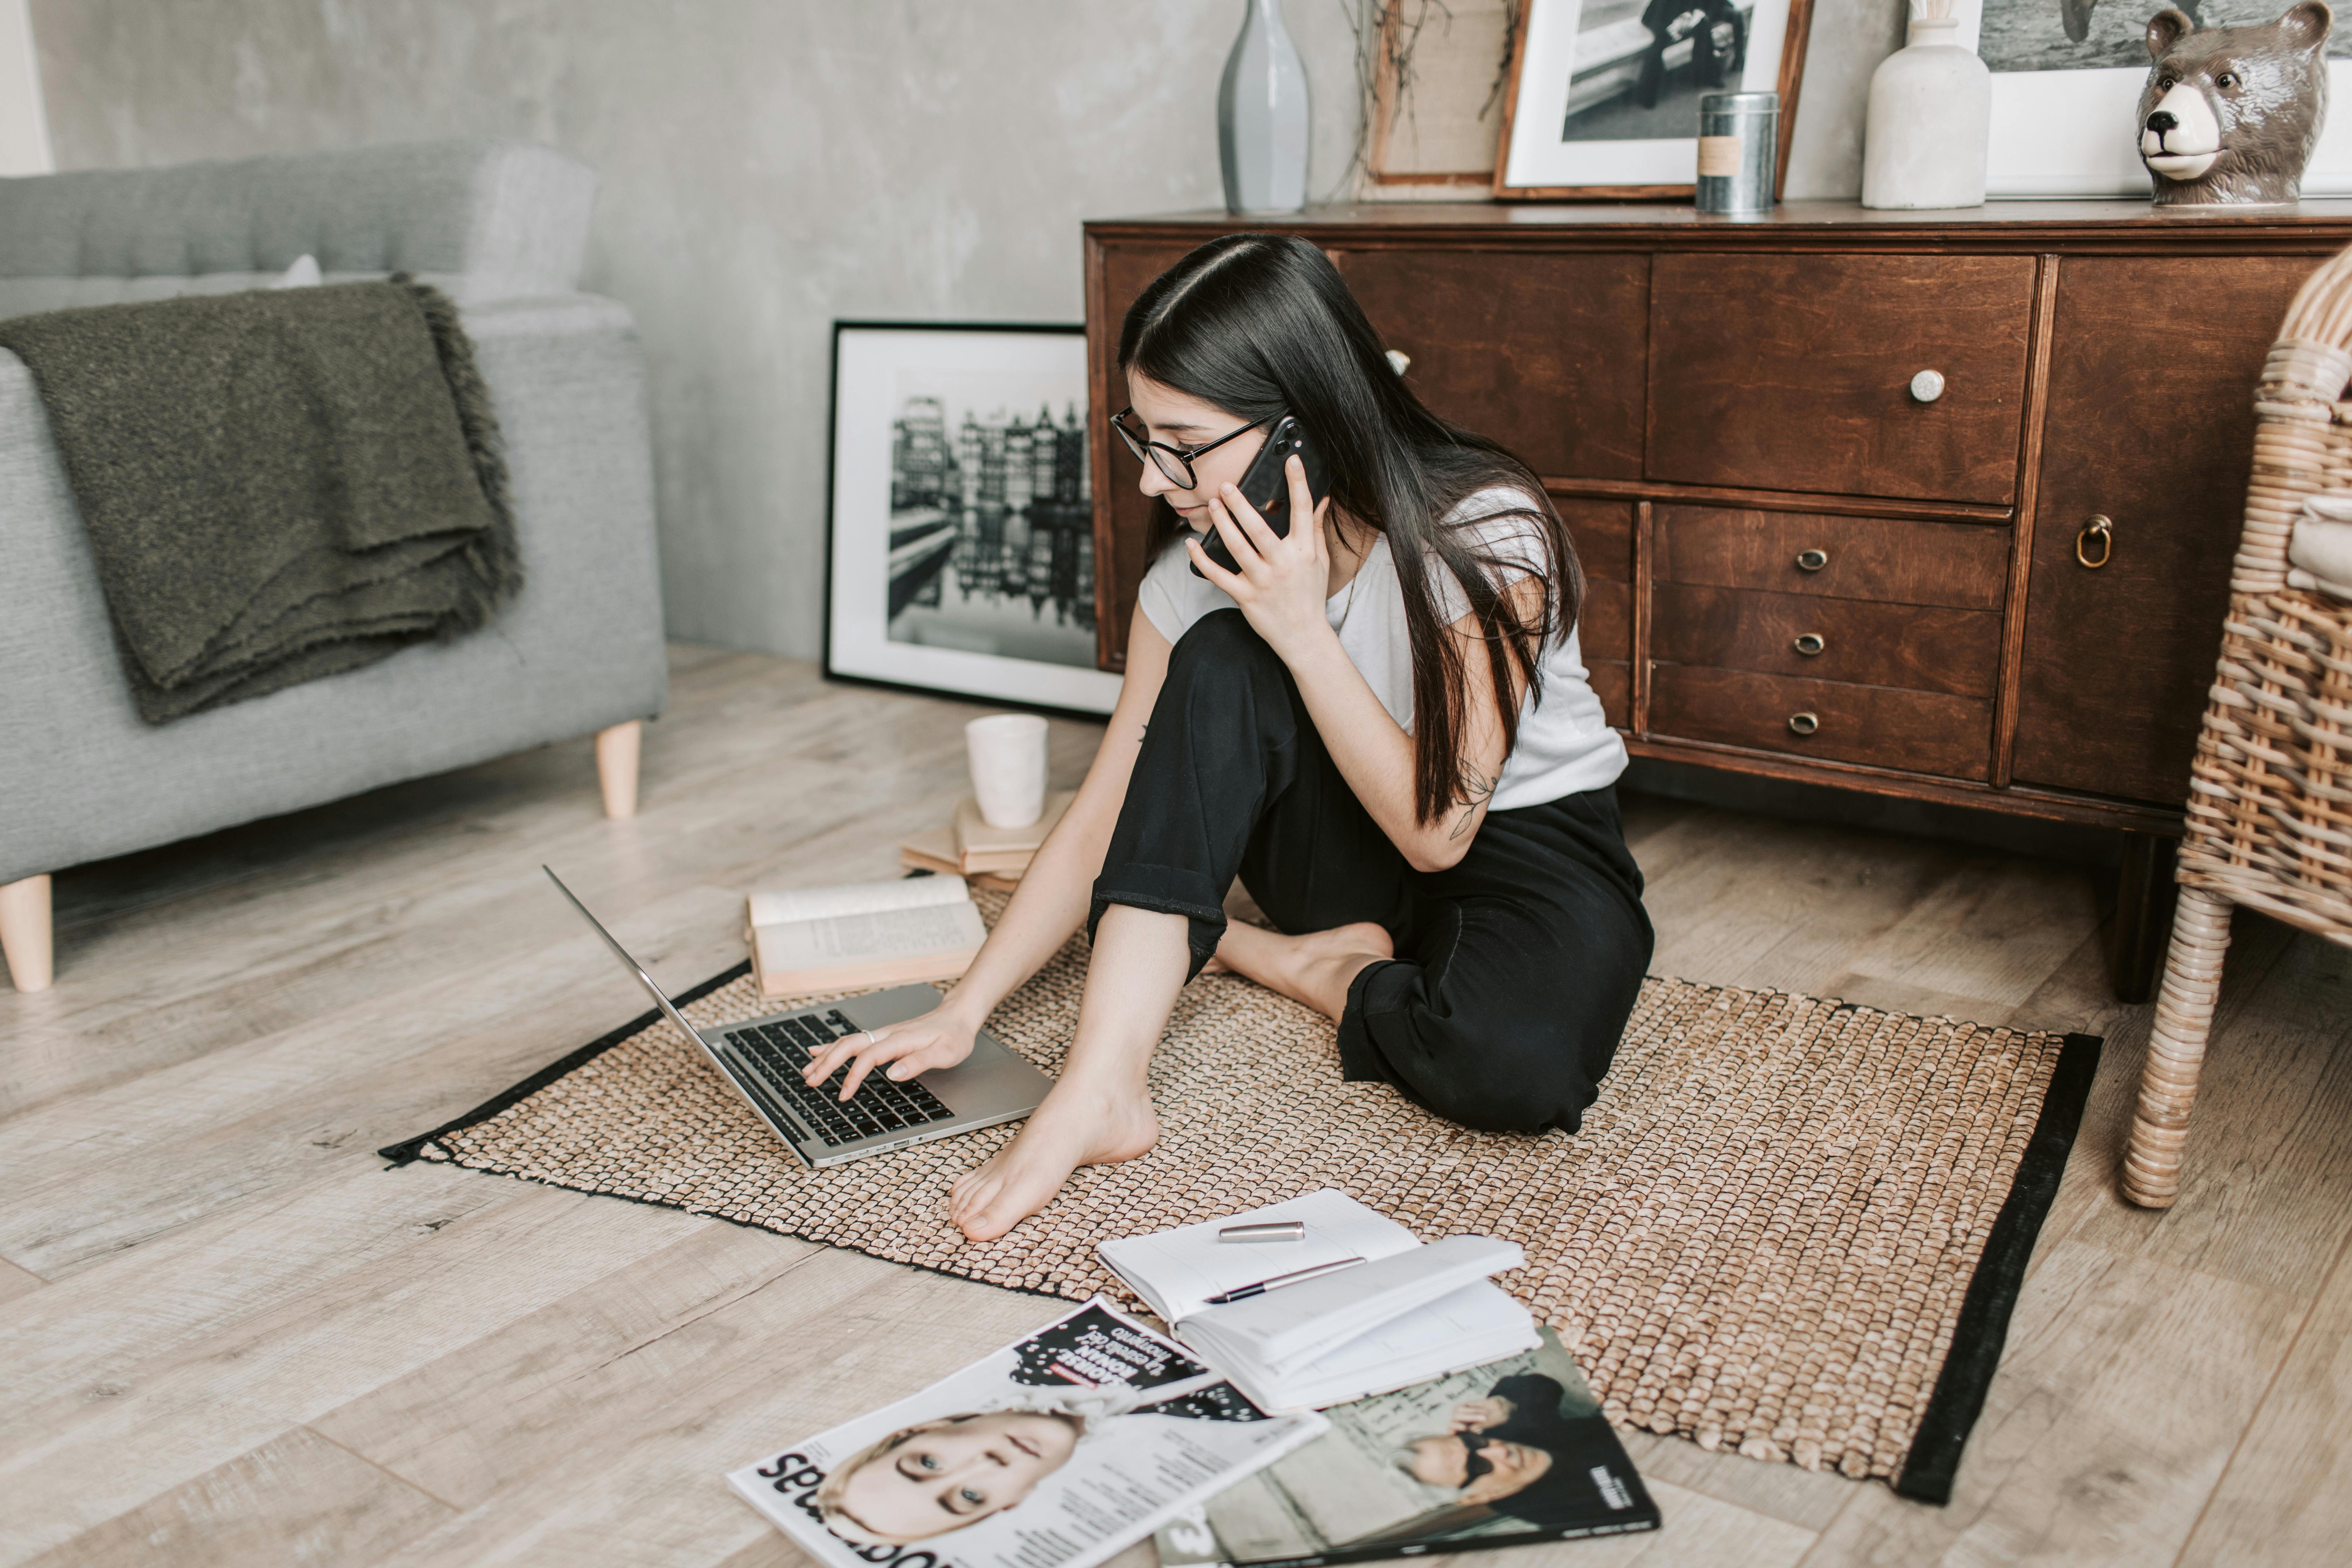 A young girl on the phone with a laptop, books, and magazines around her | Source: Pexels